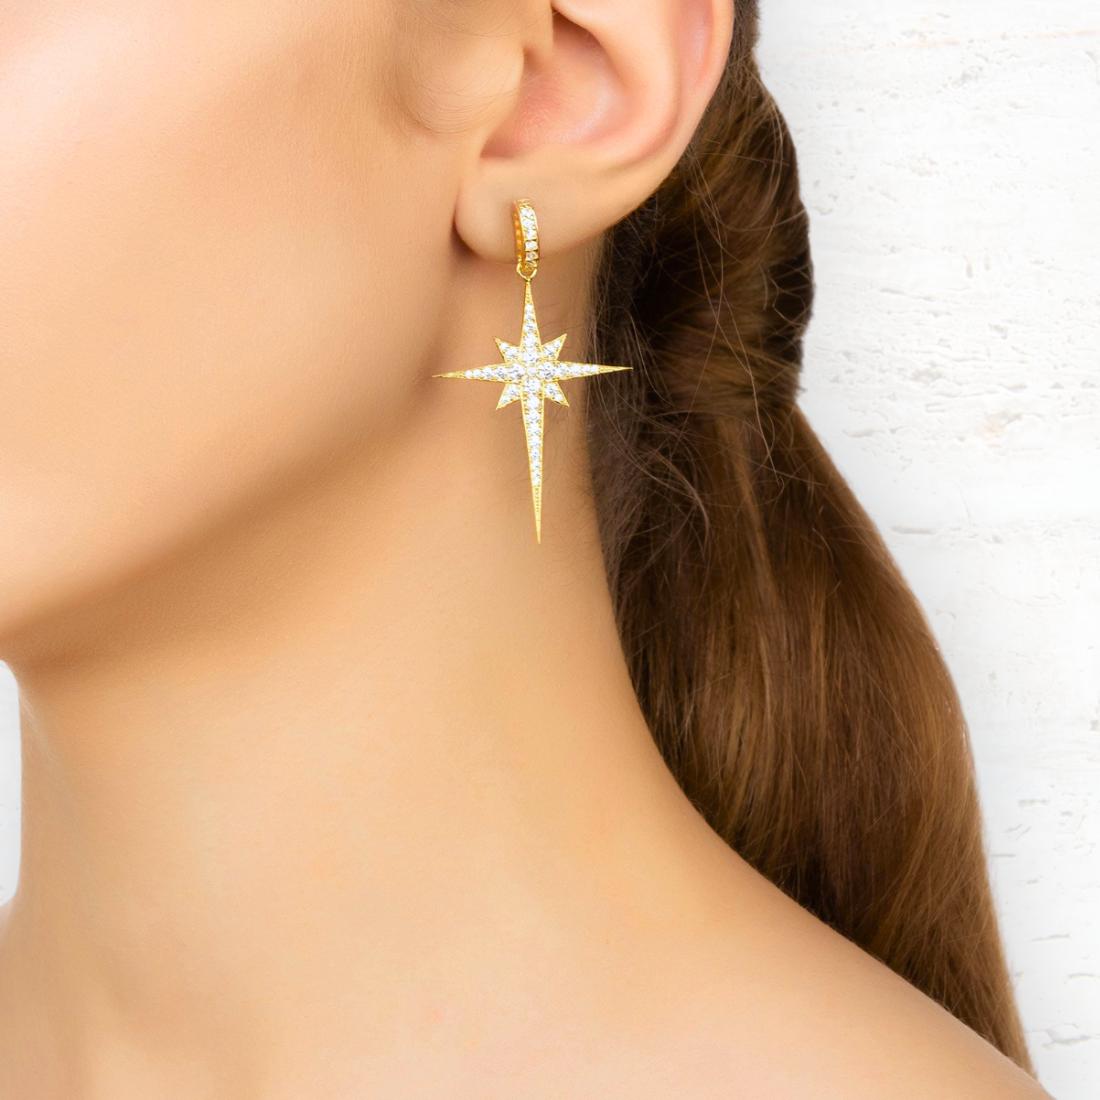 North Starburst large drop earrings in gold